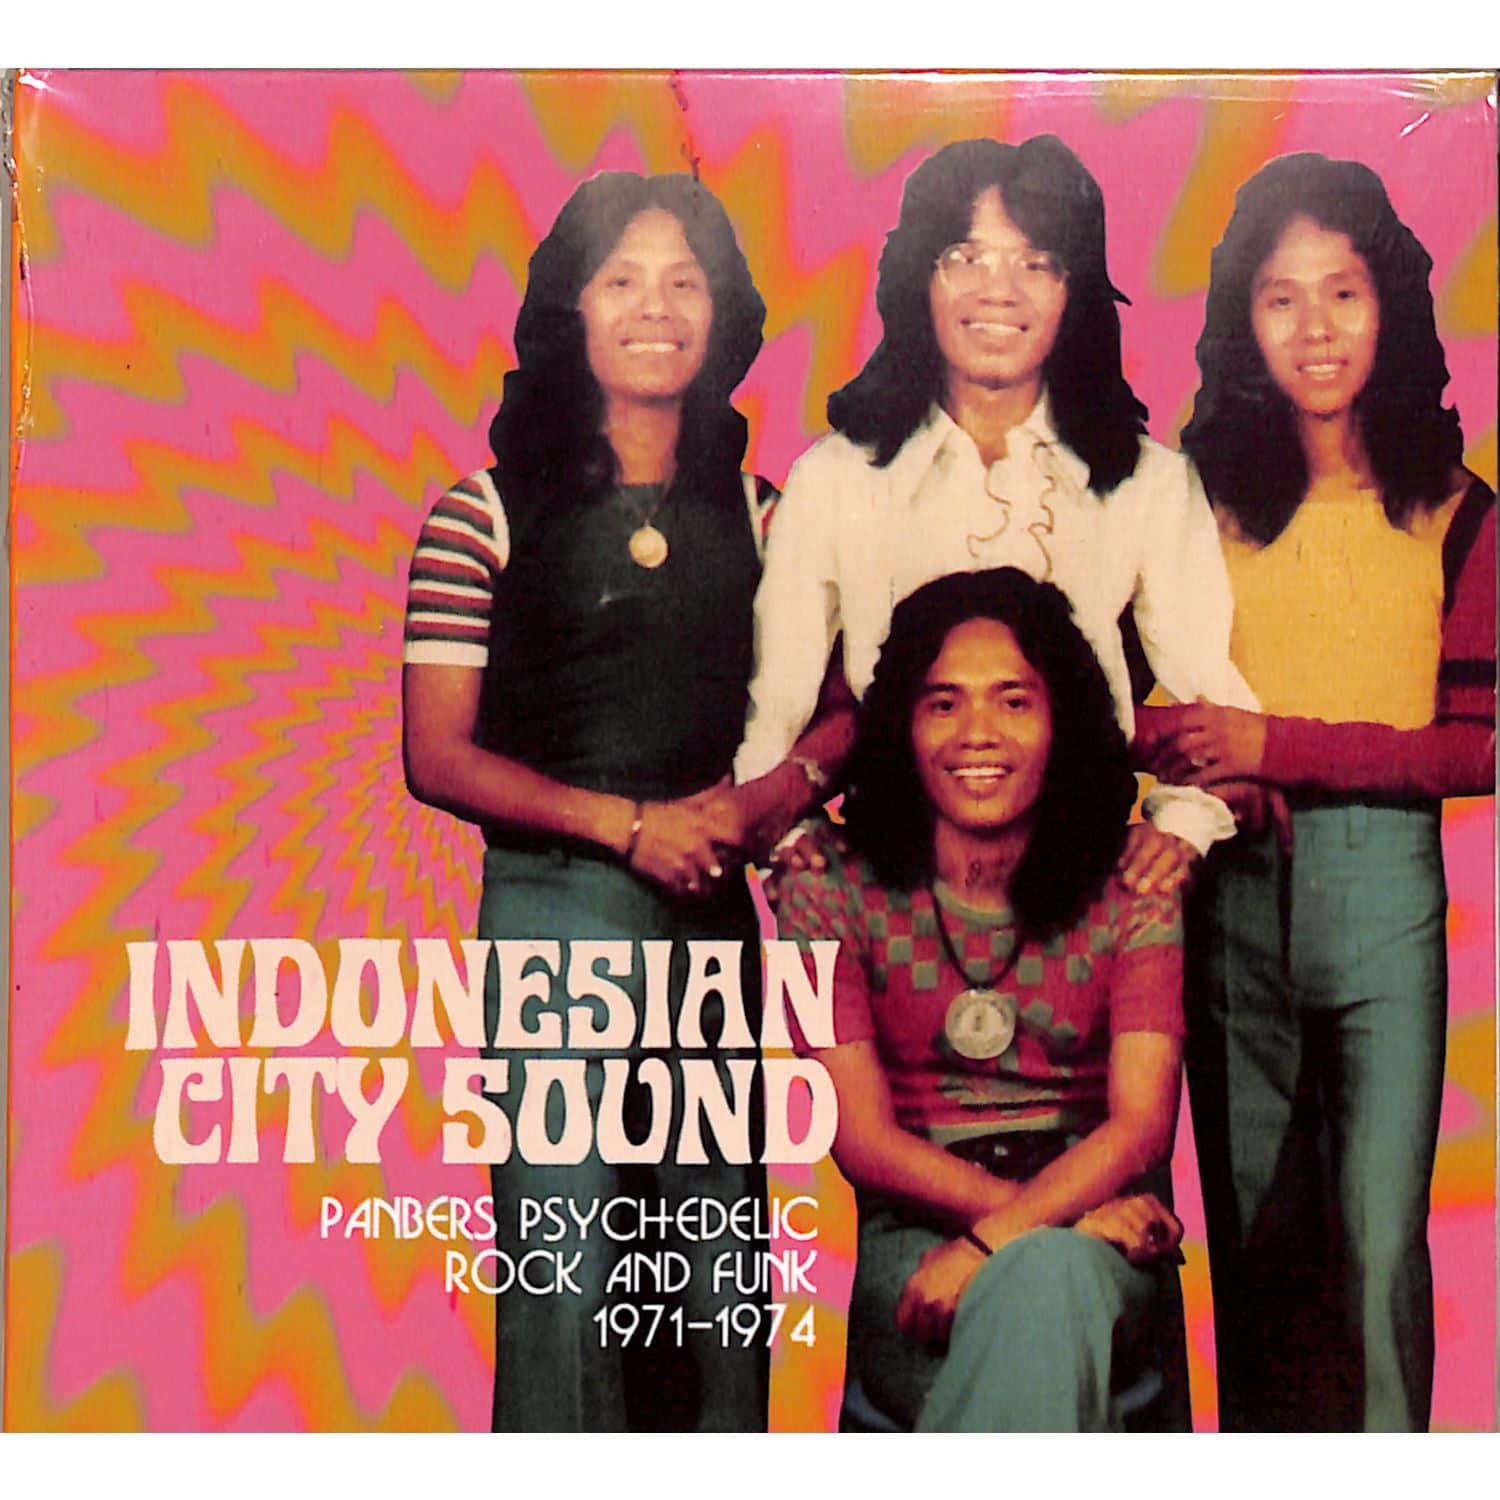 Panbers - INDONESIAN CITY SOUND: PANBERS PSYCHEDELIC ROCK AND FUNK 1971 - 1974 